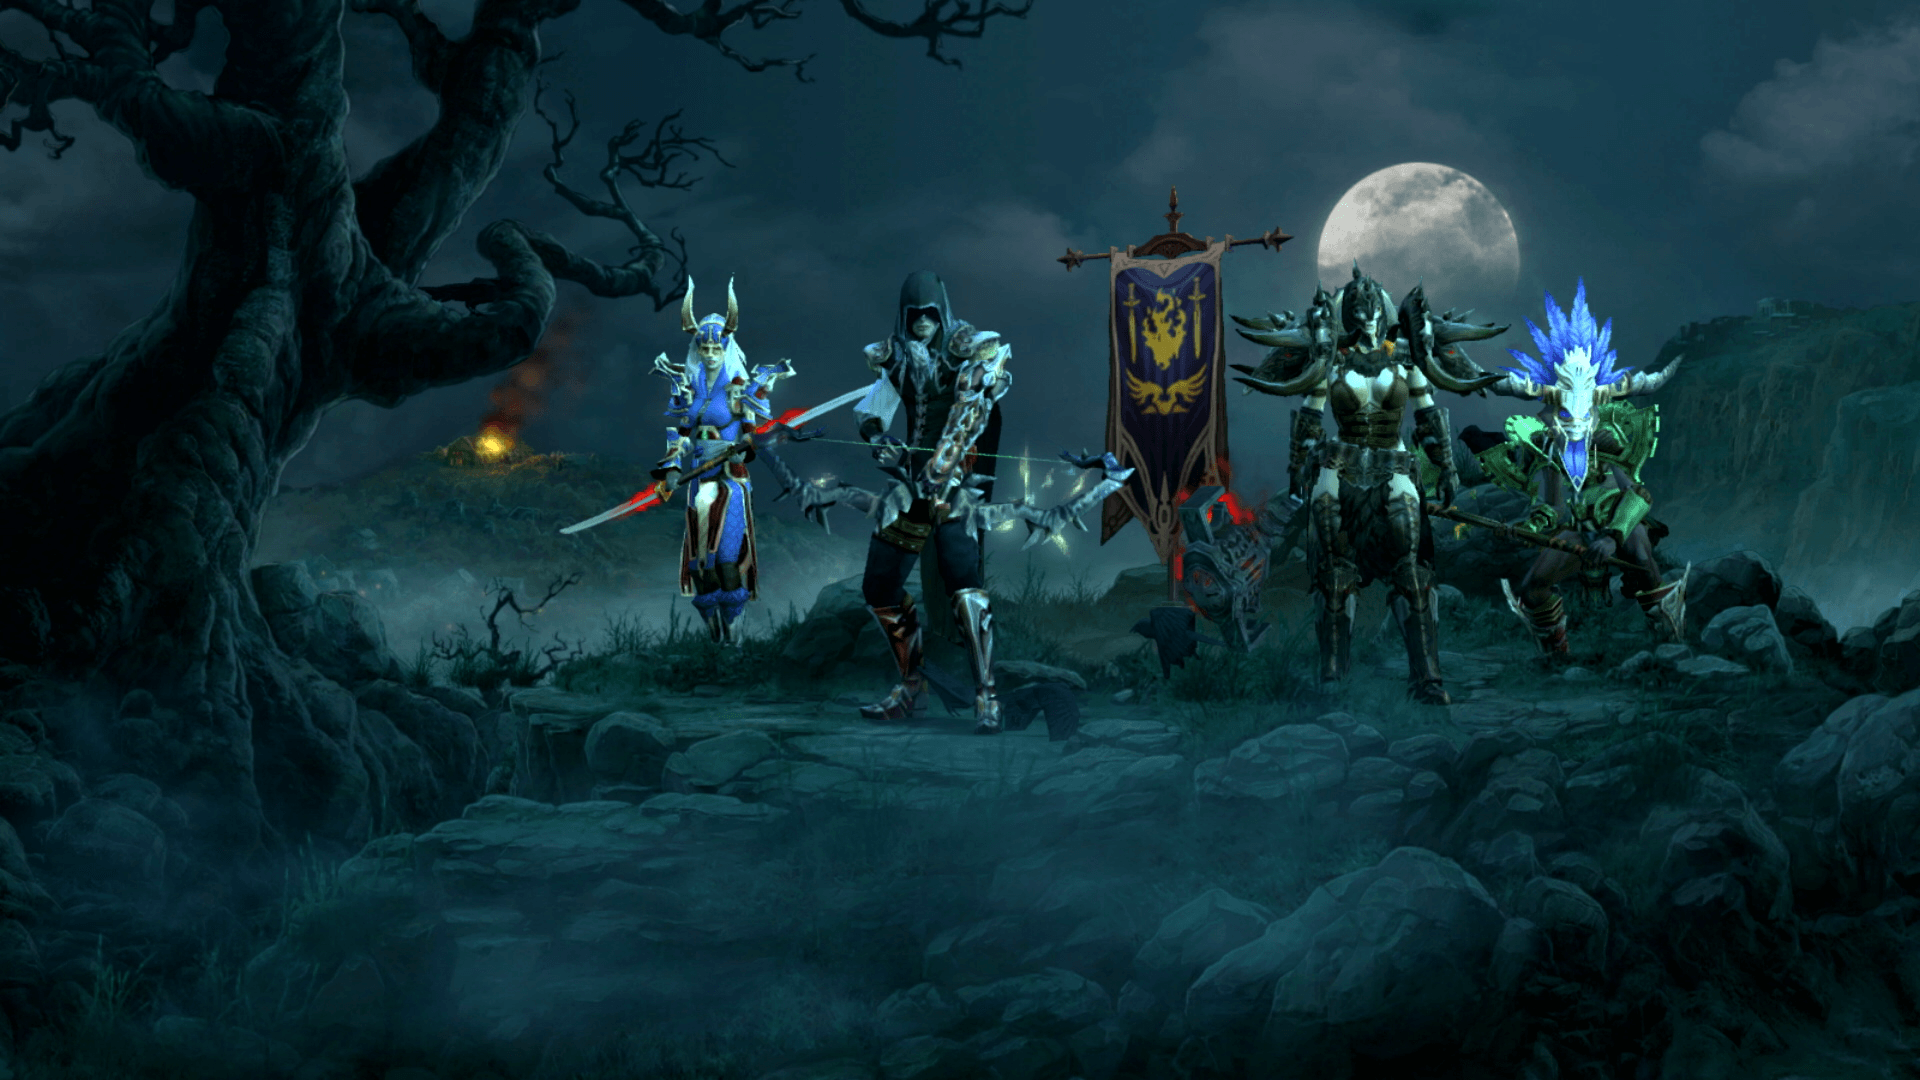 Diablo 3 is officially coming to Nintendo Switch